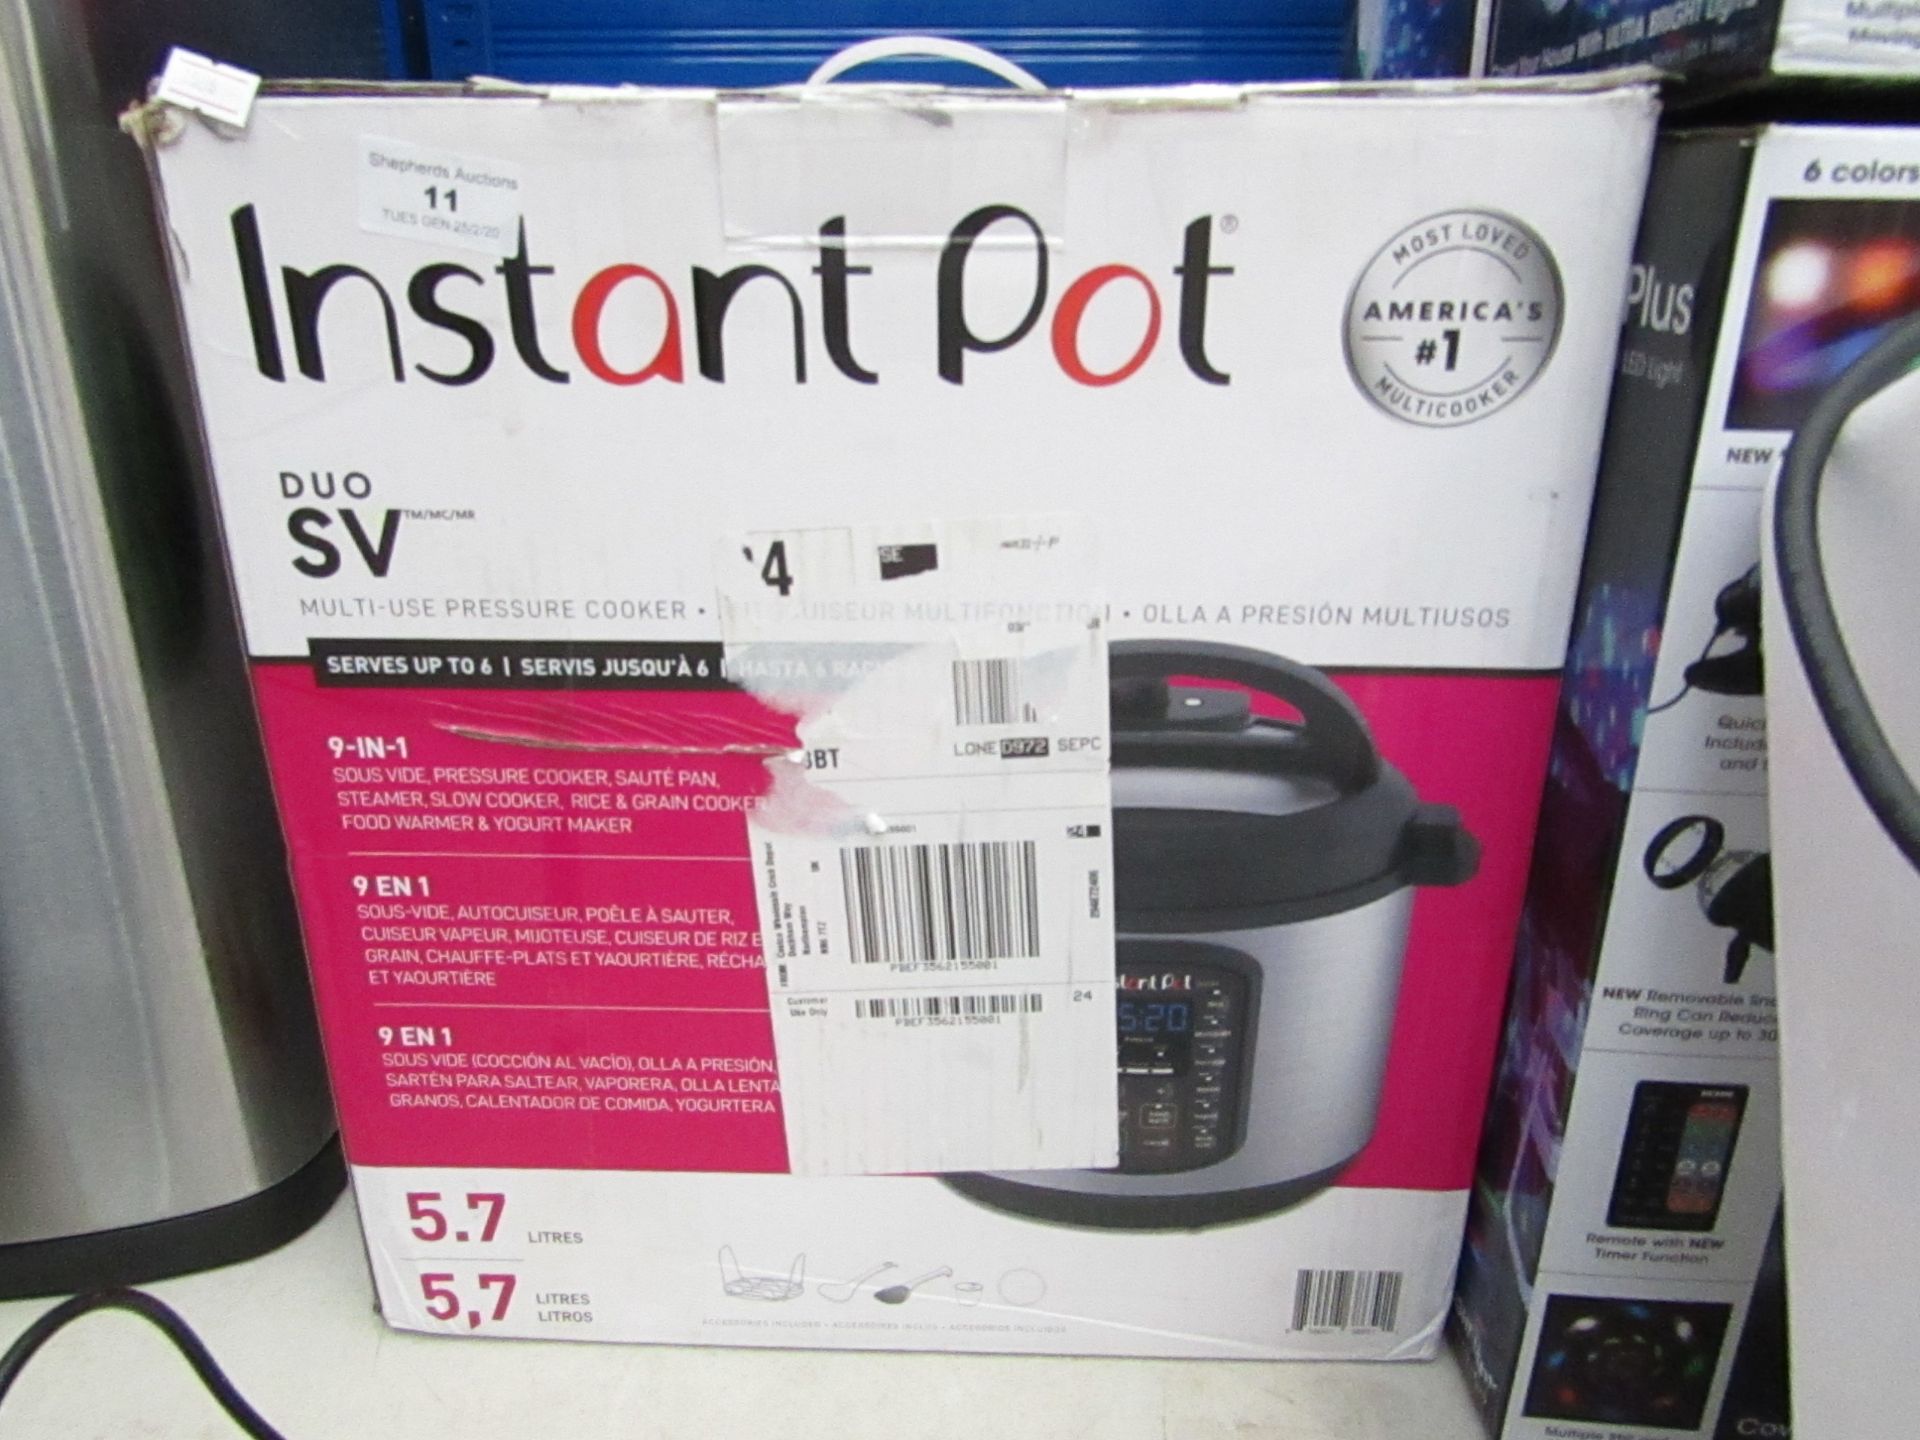 5.7L Instant Pot Multi Use Pressure Cooker 9 in 1.Boxed but untested